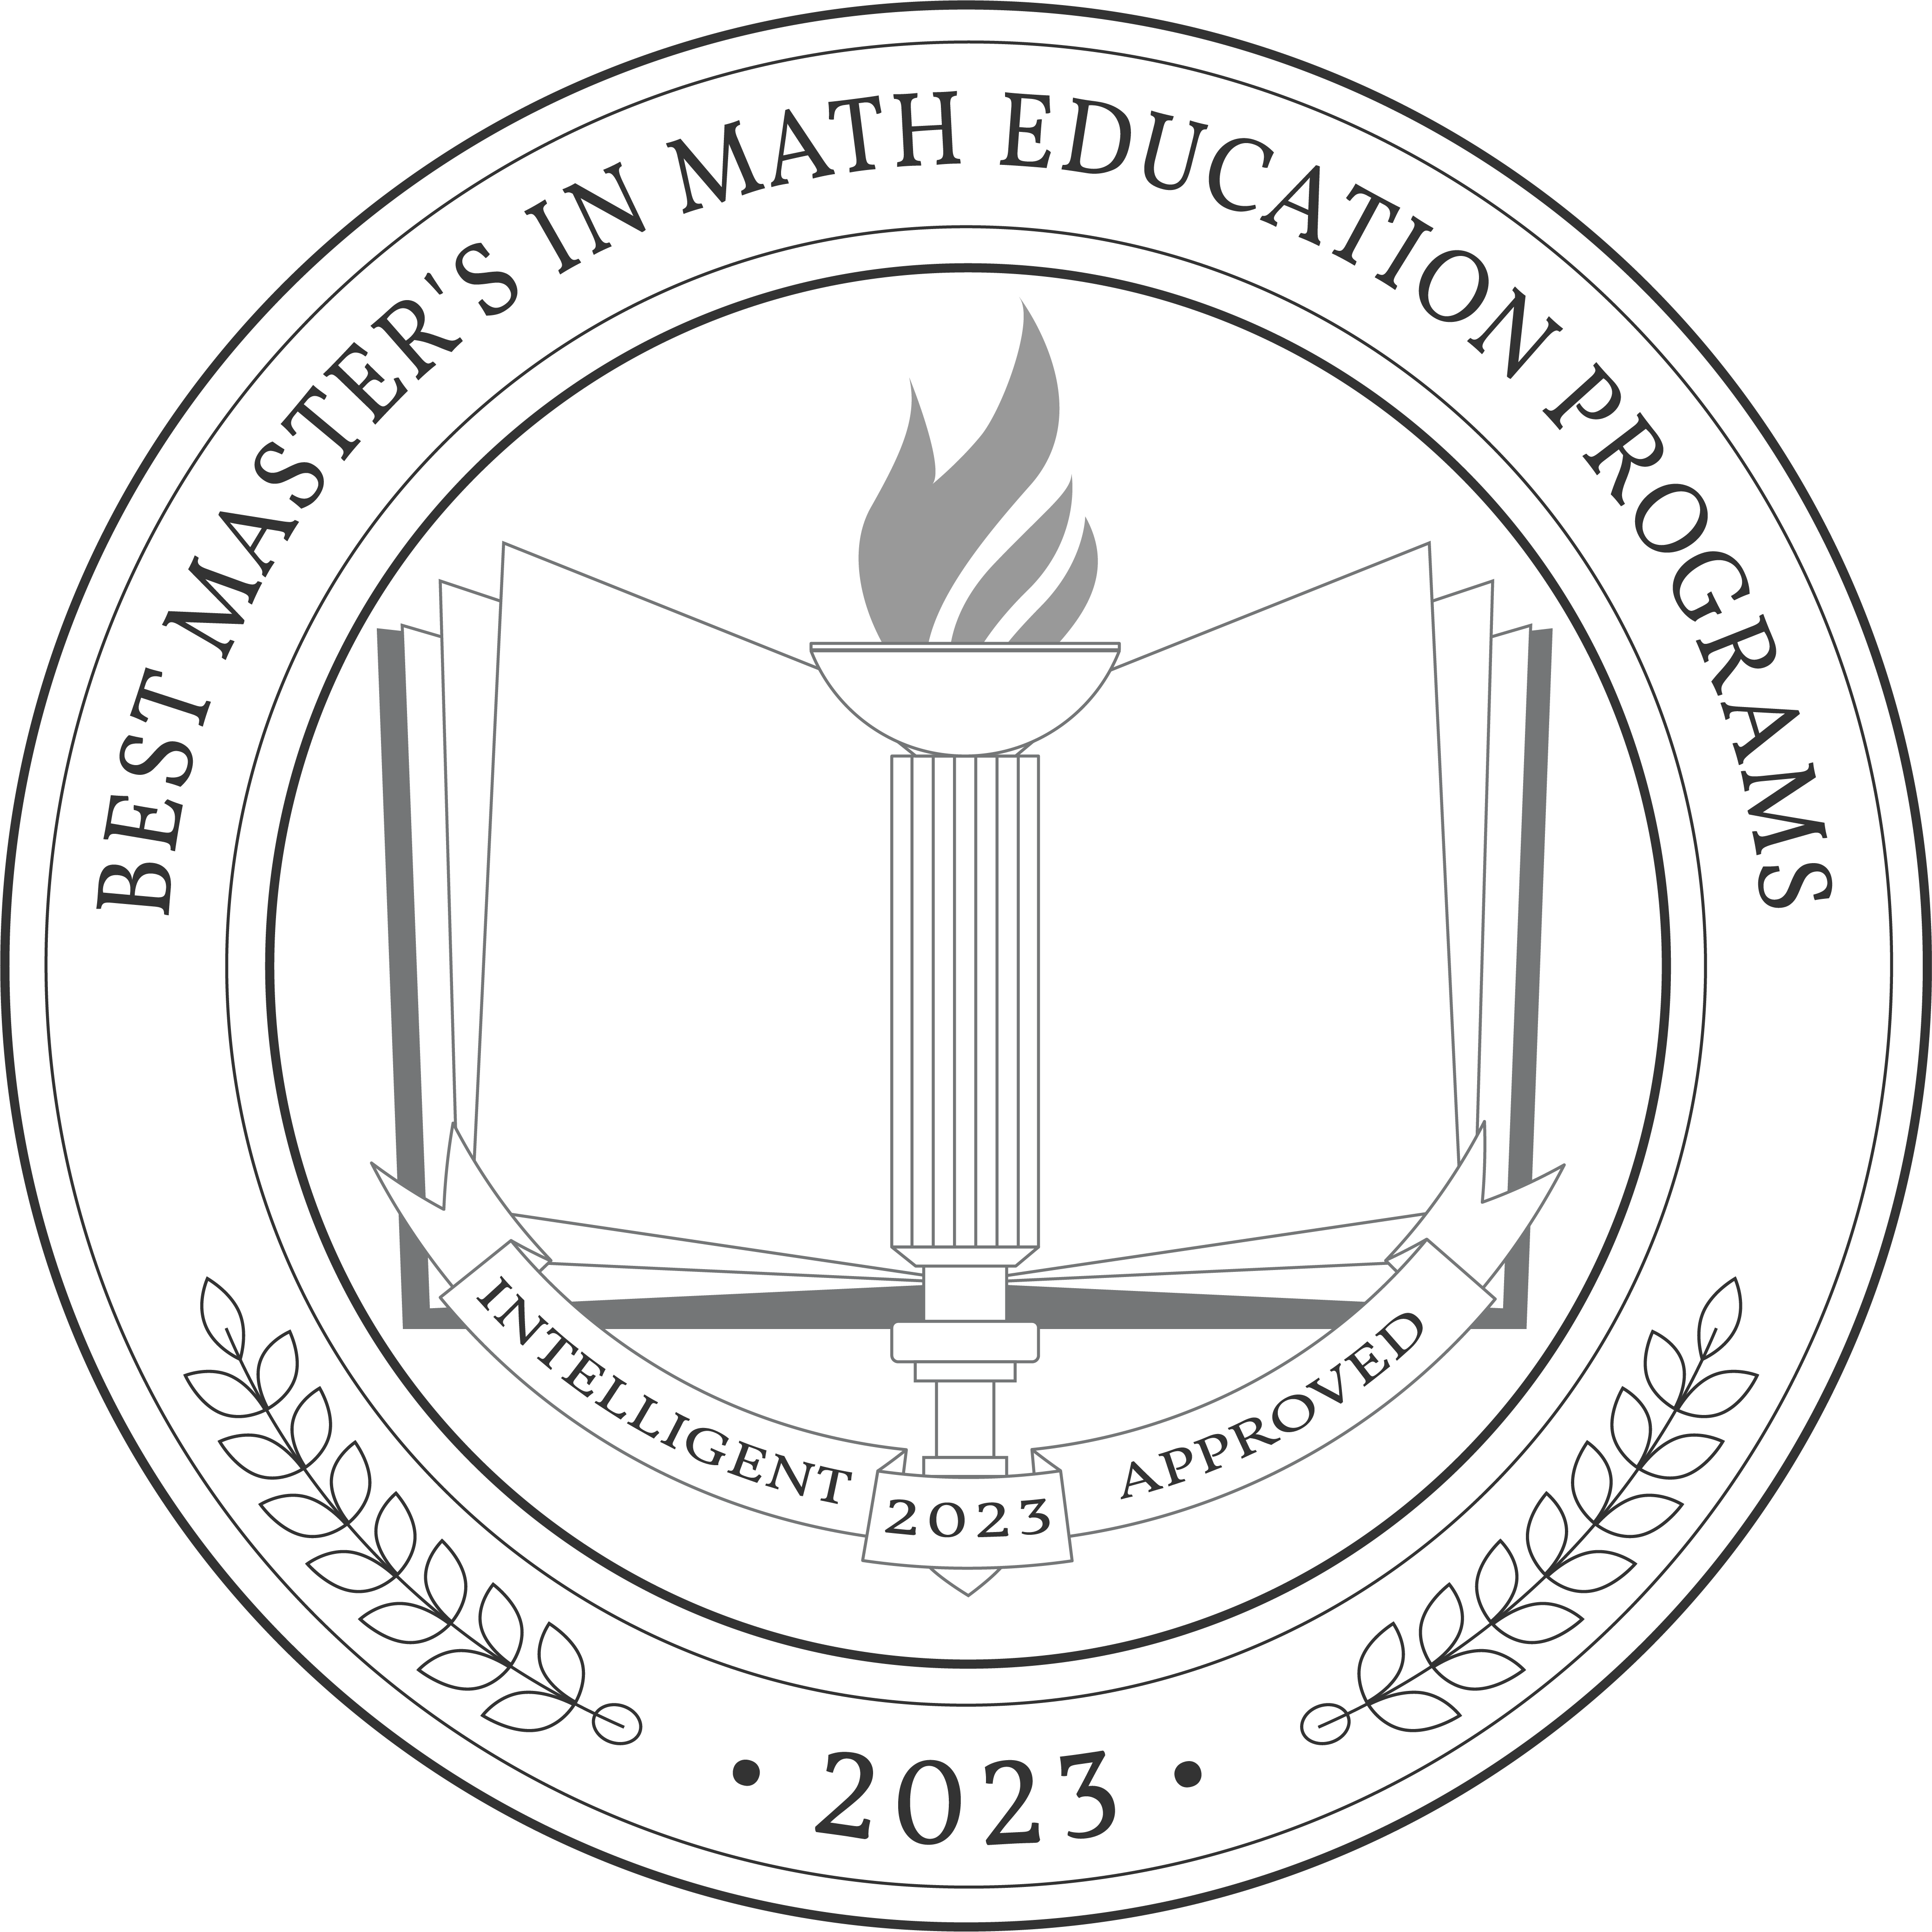 Best Master's in Math Education Programs badge